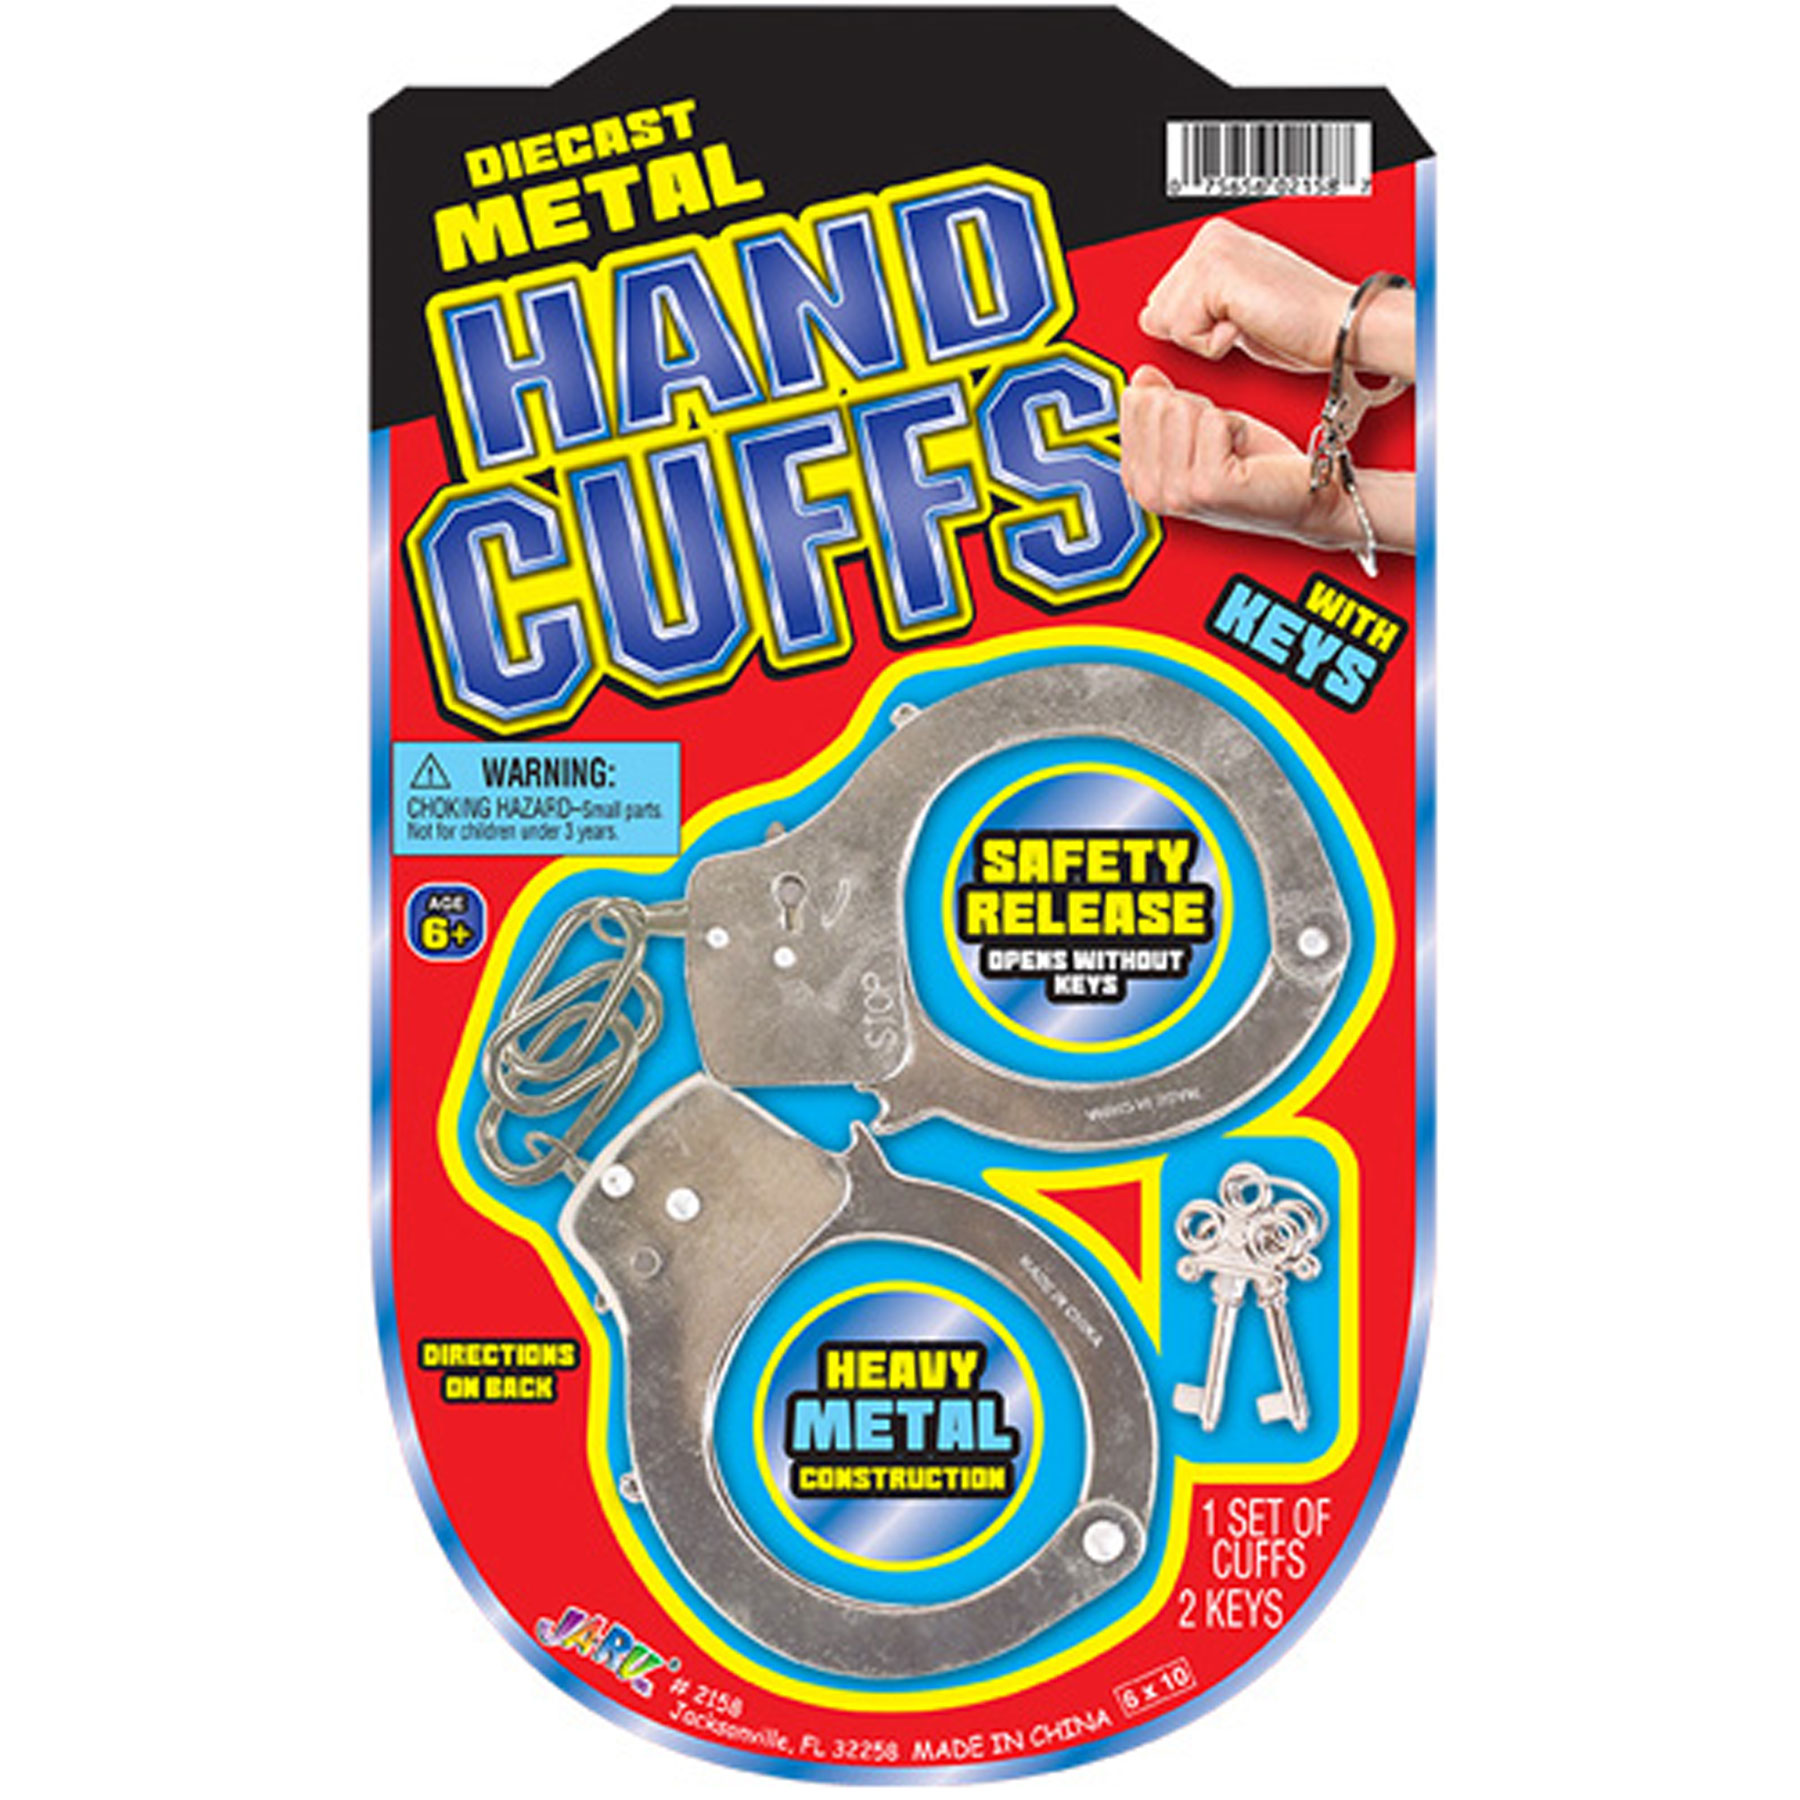 METAL HANDCUFFS CARDED